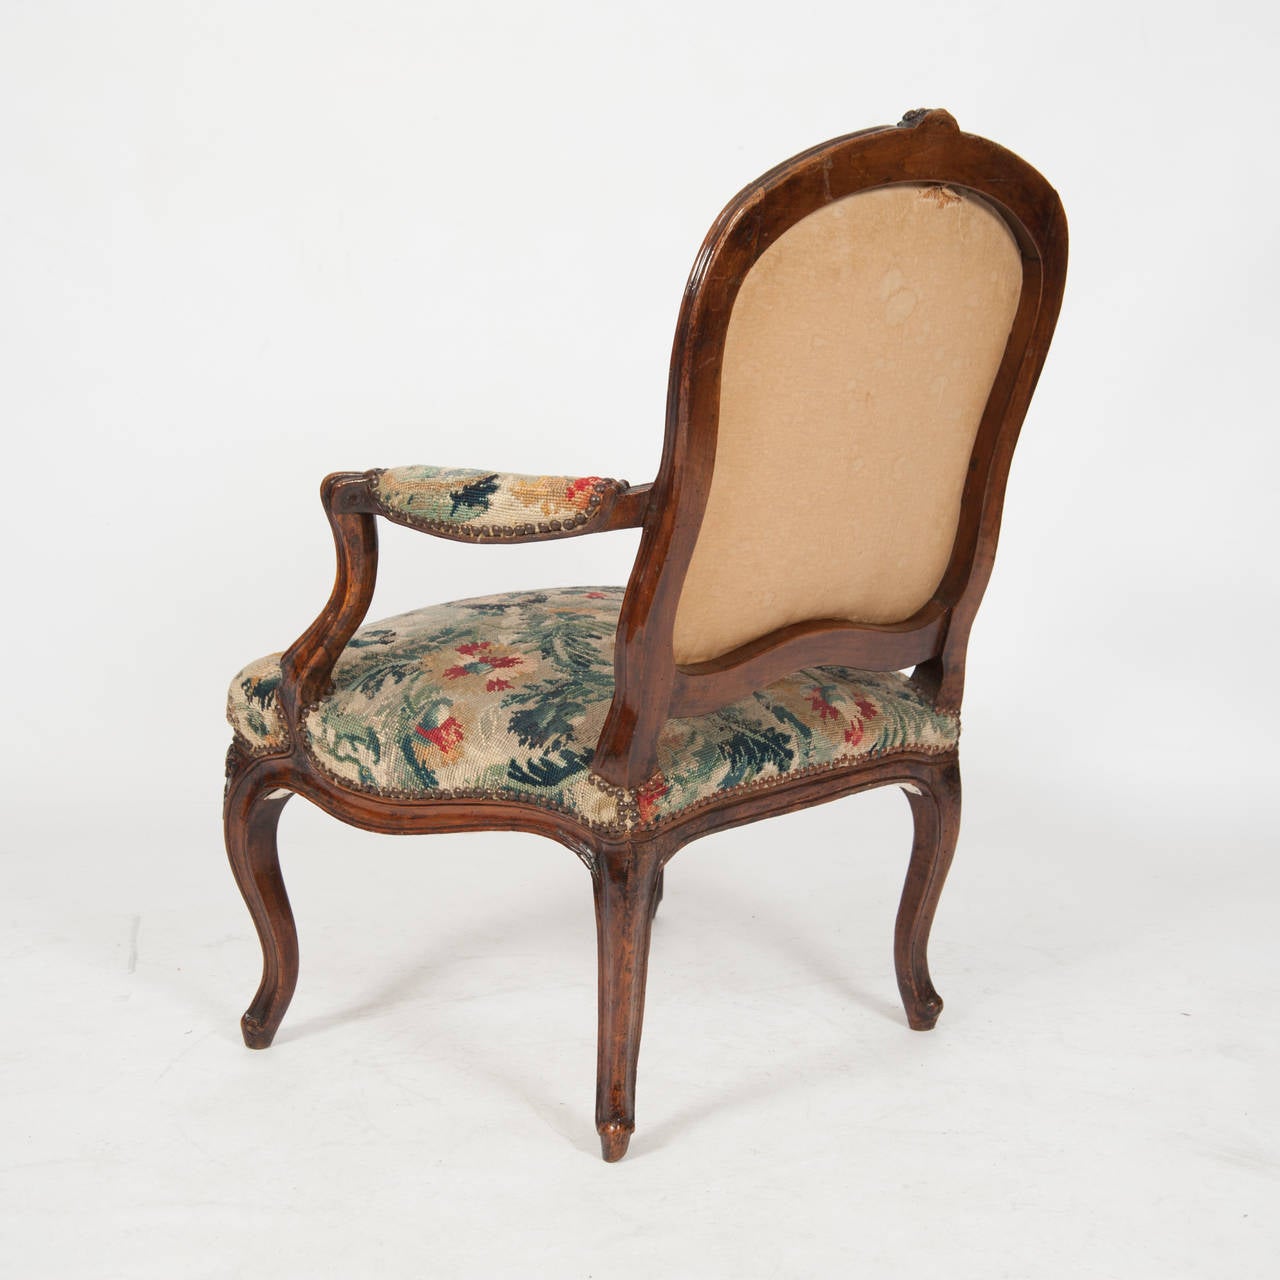 French circa 18th century Louis XV Period Fauteuil The Cartouche Shaped Back With A Central Floral Crest Above Whipstroked Arms The Serpentine Fronted Seat Above A Shaped Rail On Cabriole Legs Upholstered On Wool And Silk Petit-Point Circa 1770 H940